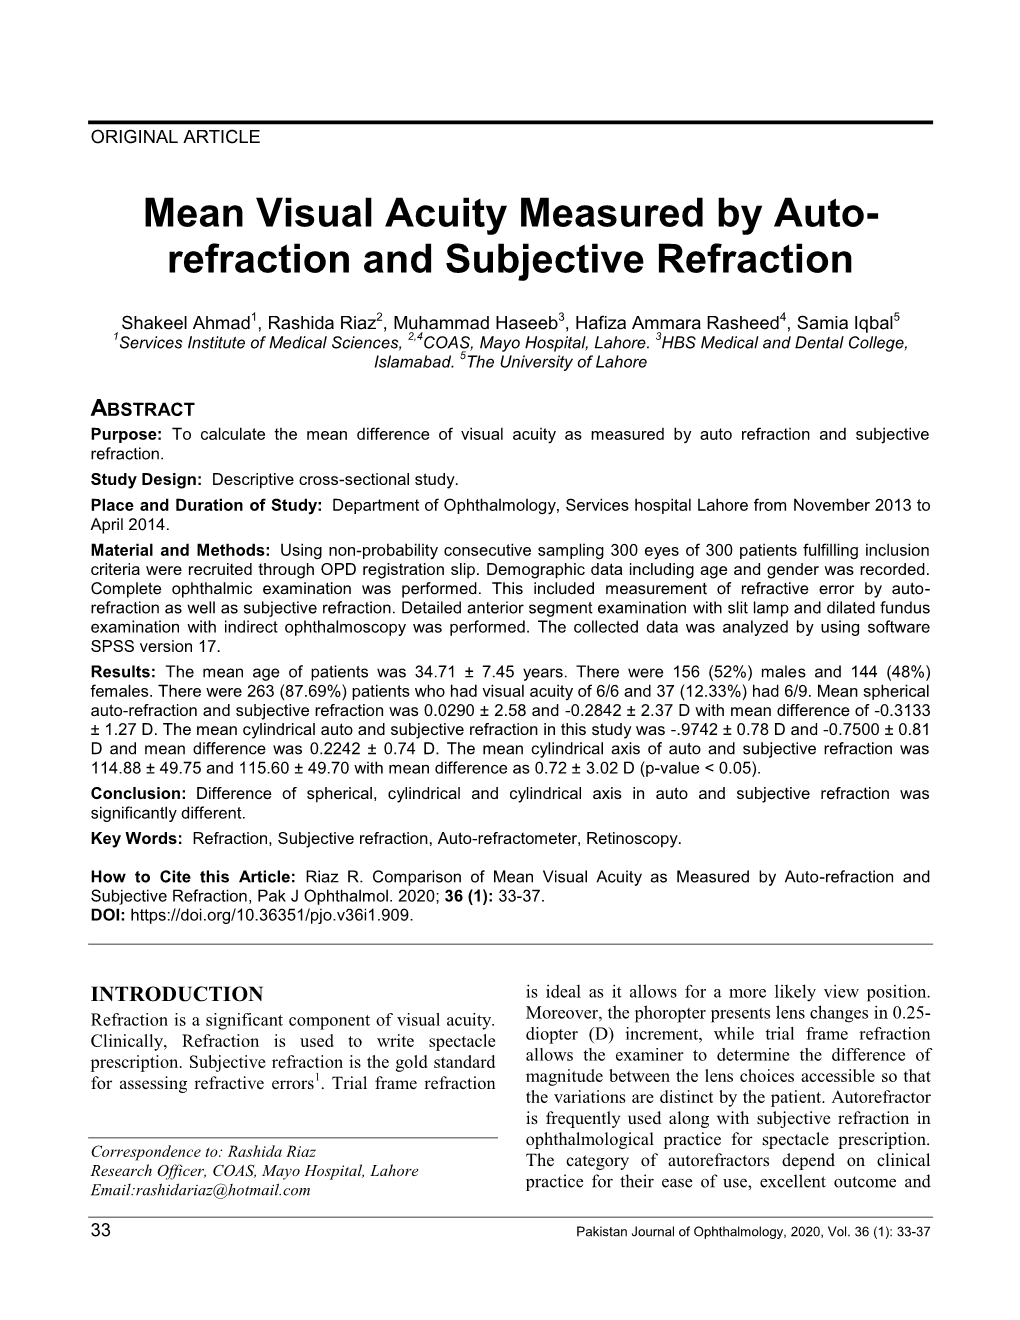 Mean Visual Acuity Measured by Auto- Refraction and Subjective Refraction